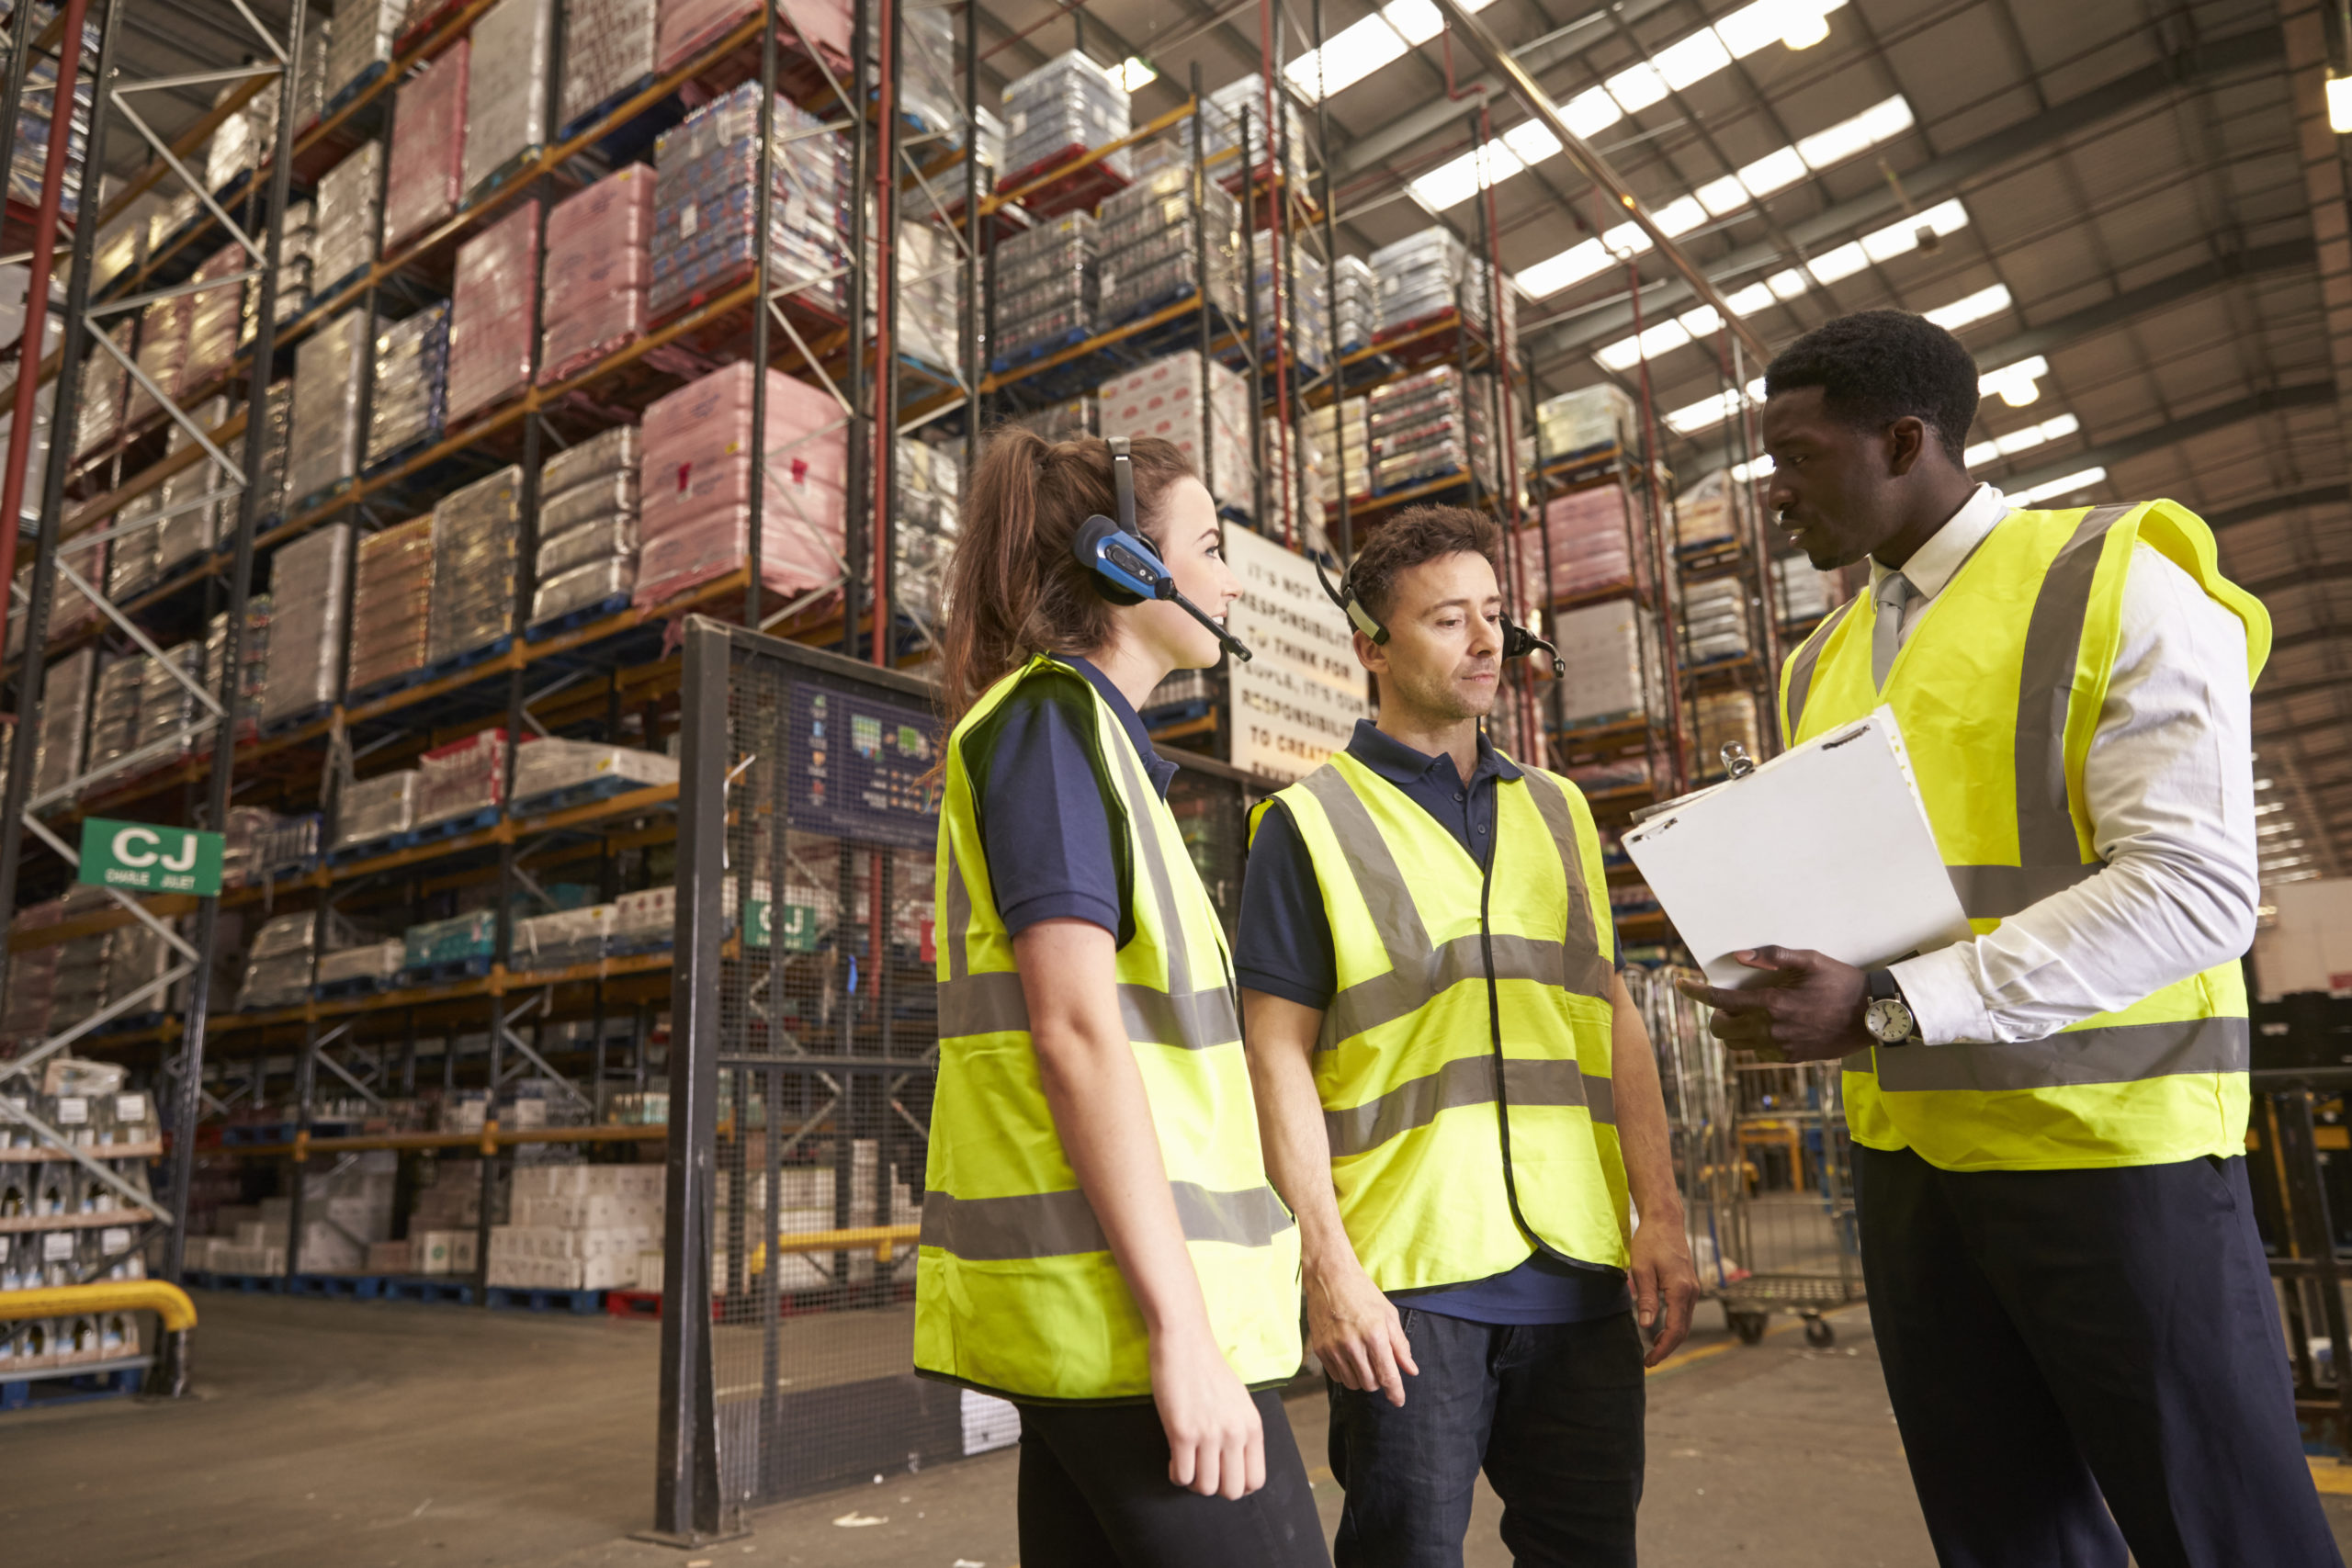 Manufactures in a warehouse wearing safety vests